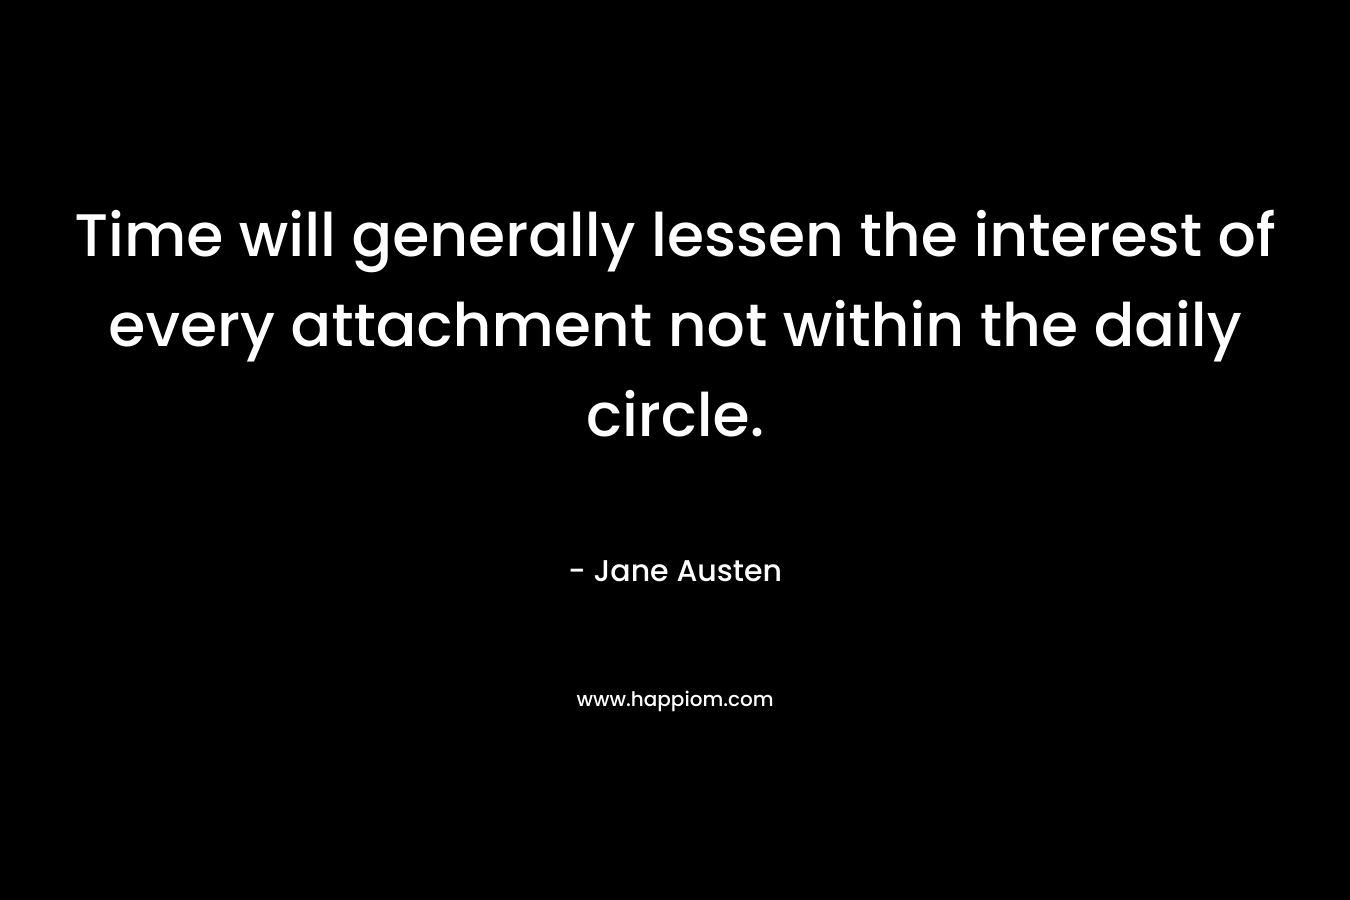 Time will generally lessen the interest of every attachment not within the daily circle.